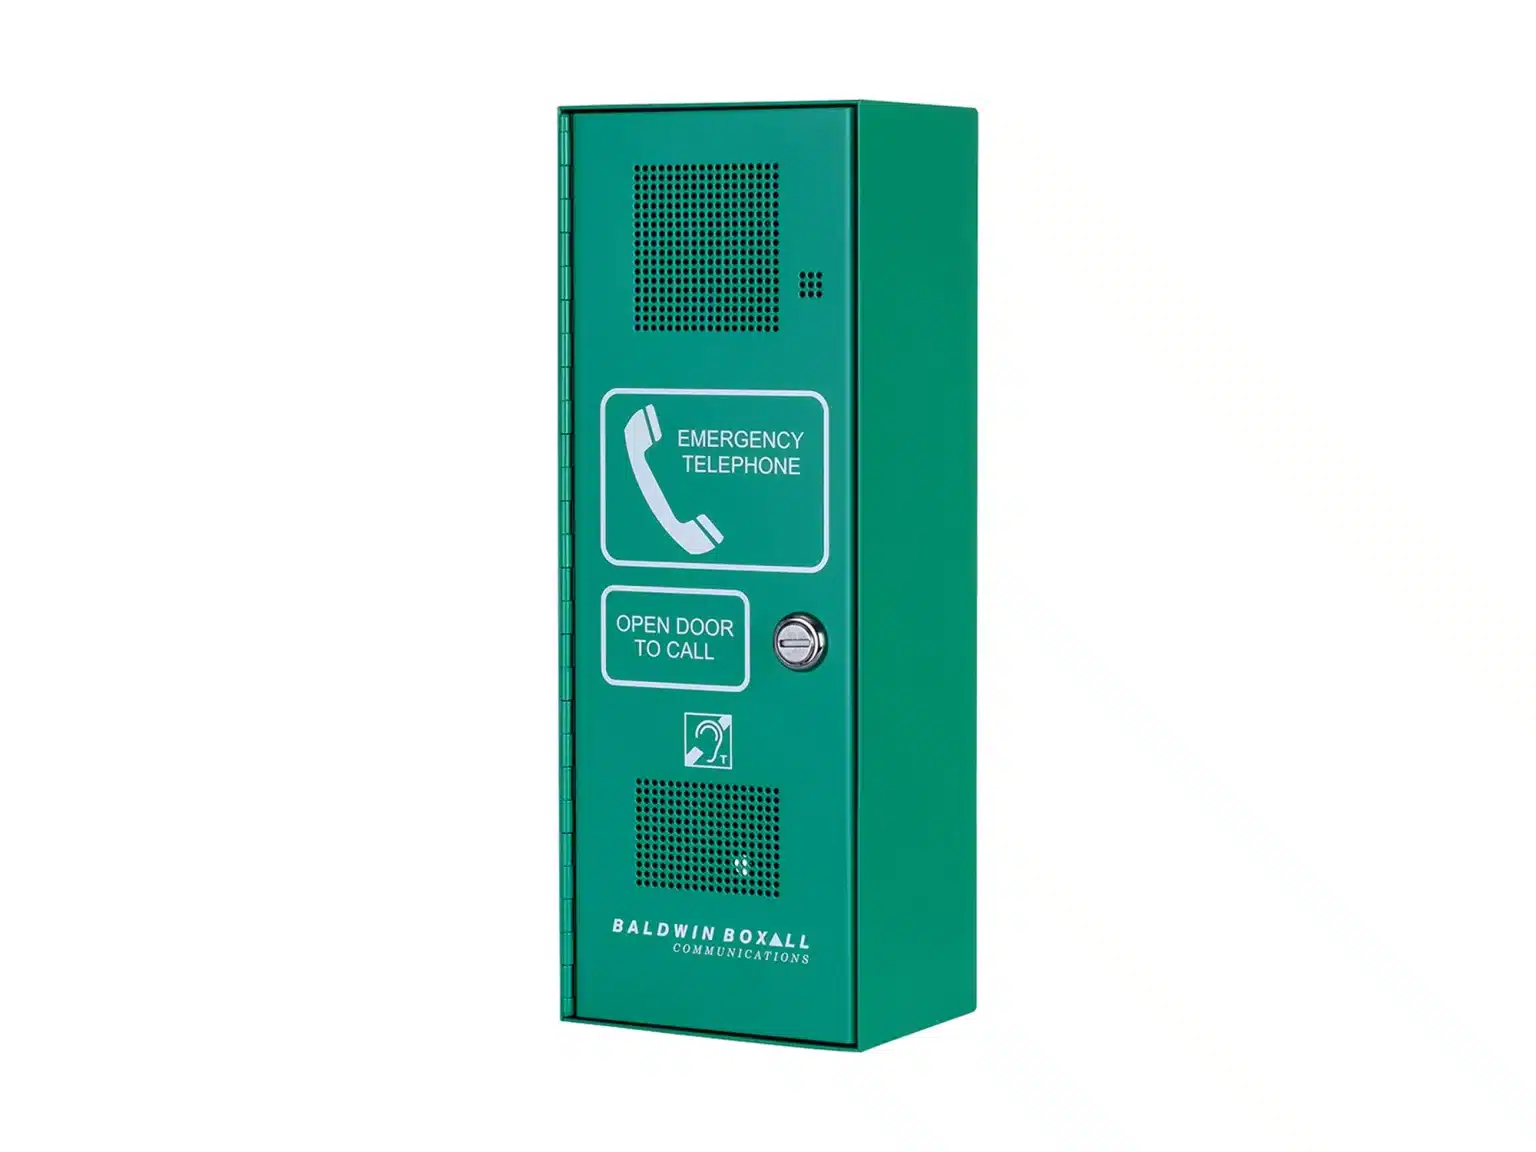 OmniCare Steward Telephone BVOCETL with Lock - Green (Left)